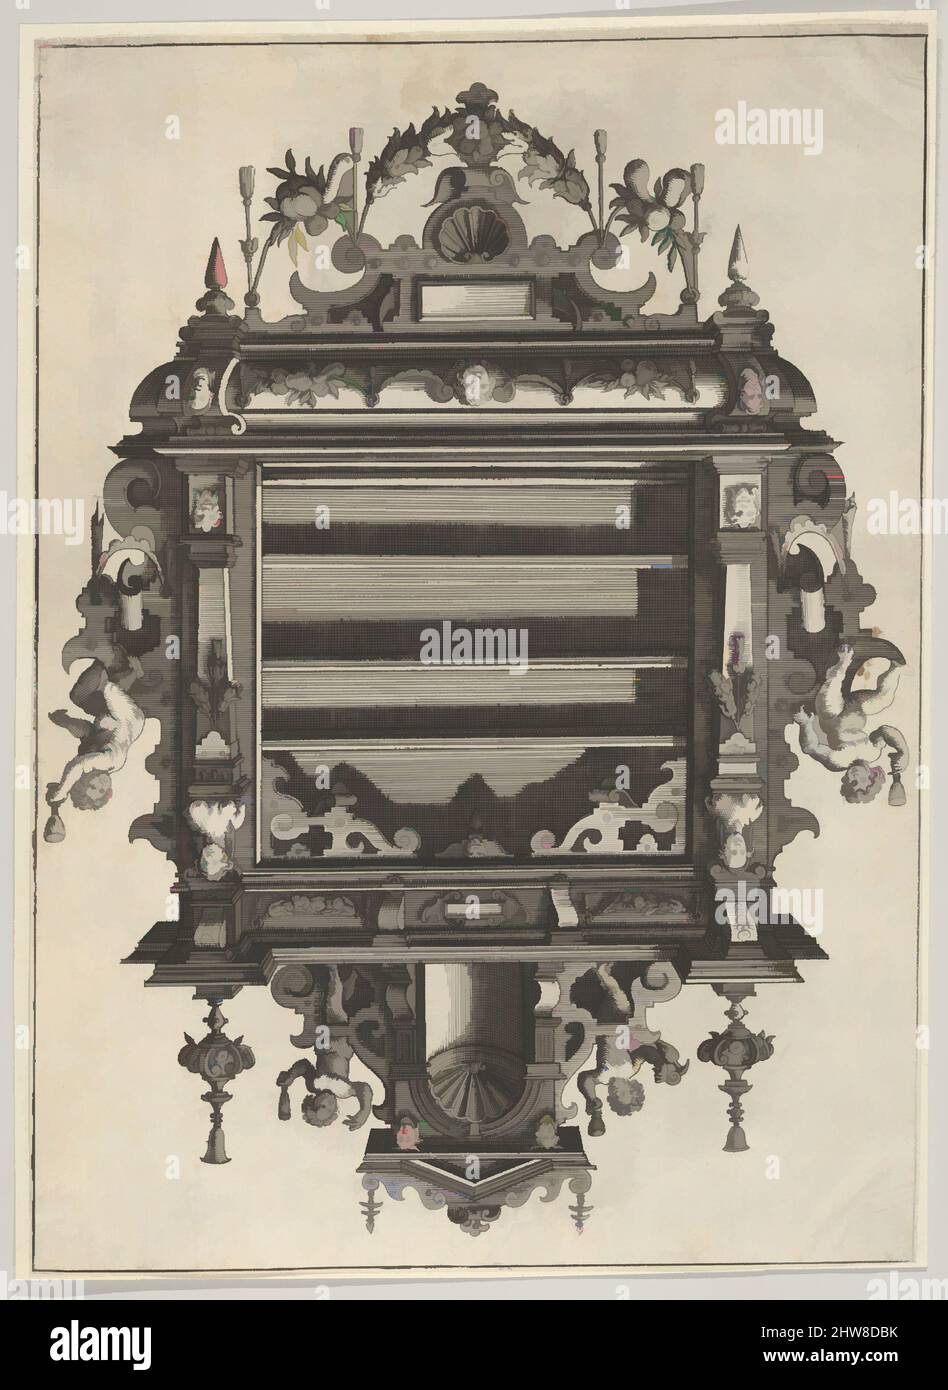 Art inspired by Wall-mounted Shelf Unit from 'Verscheyden Schrynwerck (...)' 'Plusieurs Menuiseries (...)', 1658, Engraving, Sheet: 10 15/16 × 7 7/8 in. (27.8 × 20 cm) cropped within plate mark, after Paul Vredeman de Vries (Netherlandish, Antwerp 1567–1630), Design for a wall-mounted, Classic works modernized by Artotop with a splash of modernity. Shapes, color and value, eye-catching visual impact on art. Emotions through freedom of artworks in a contemporary way. A timeless message pursuing a wildly creative new direction. Artists turning to the digital medium and creating the Artotop NFT Stock Photo